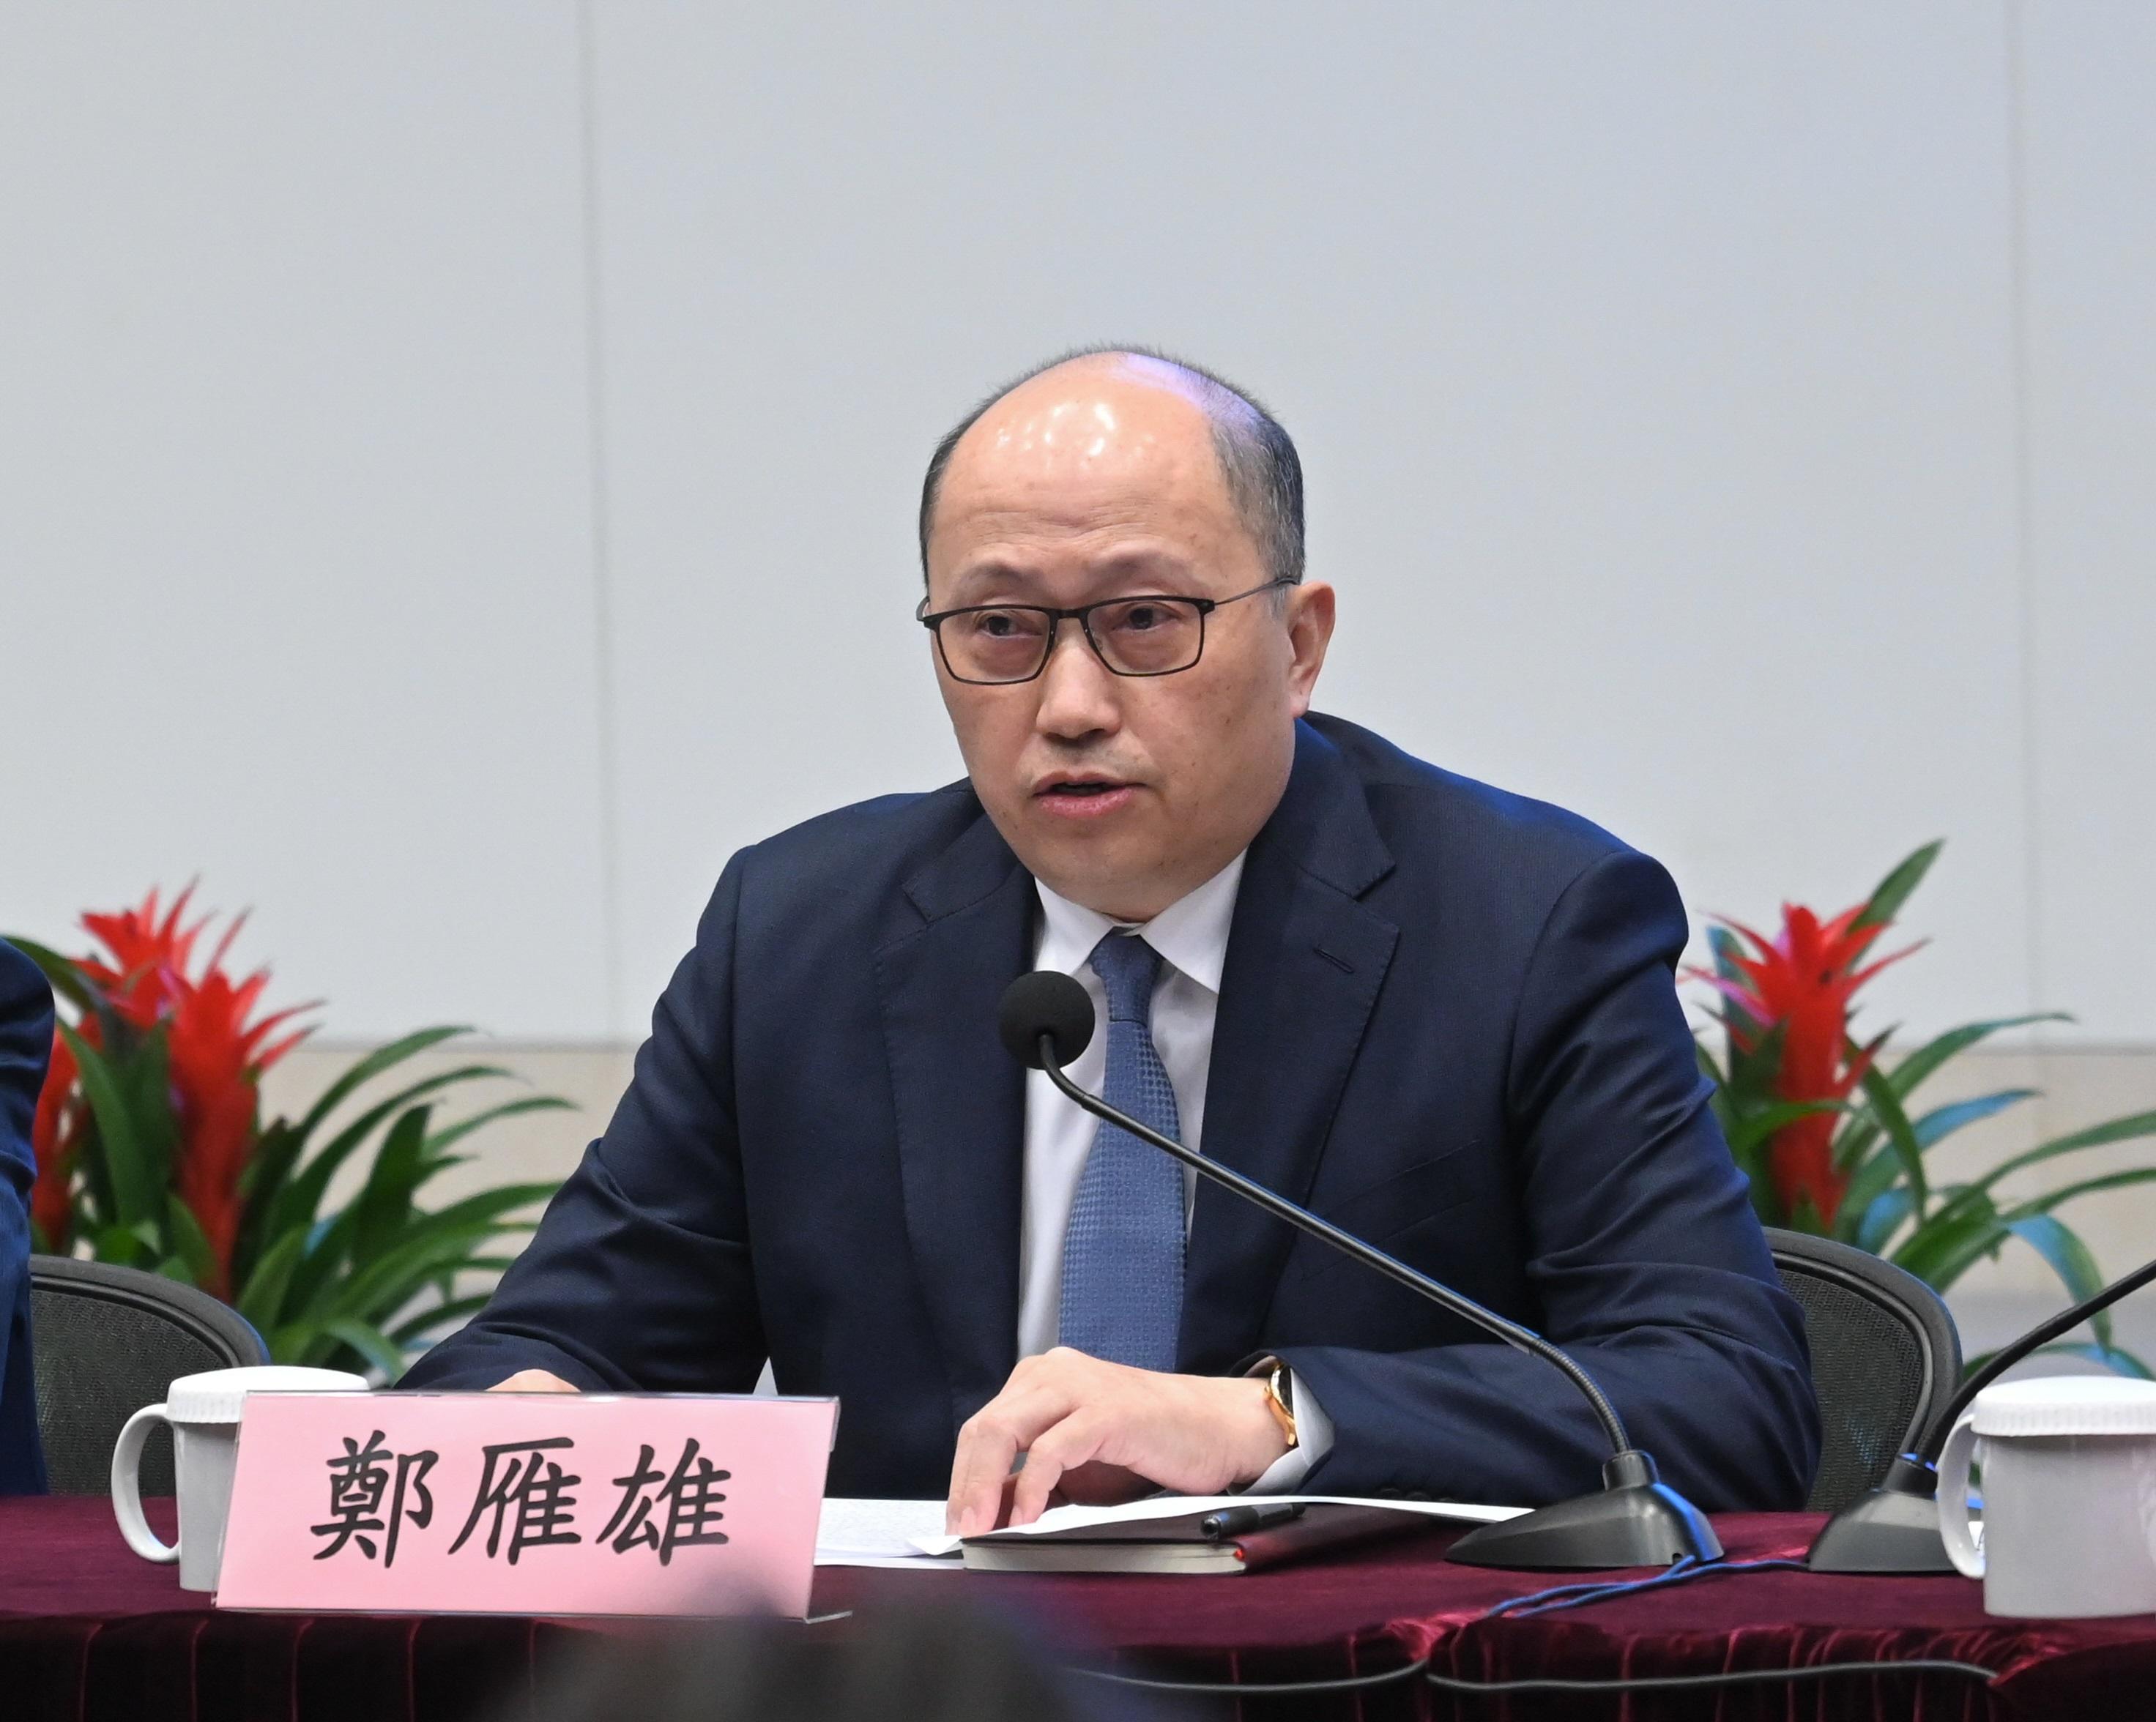 The Hong Kong Special Administrative Region (HKSAR) Government today (March 28) held a seminar on learning and implementing the spirit of the "two sessions" at the Central Government Offices. Photo shows the Director of the Liaison Office of the Central People's Government in the HKSAR, Mr Zheng Yanxiong, sharing his views at the seminar.